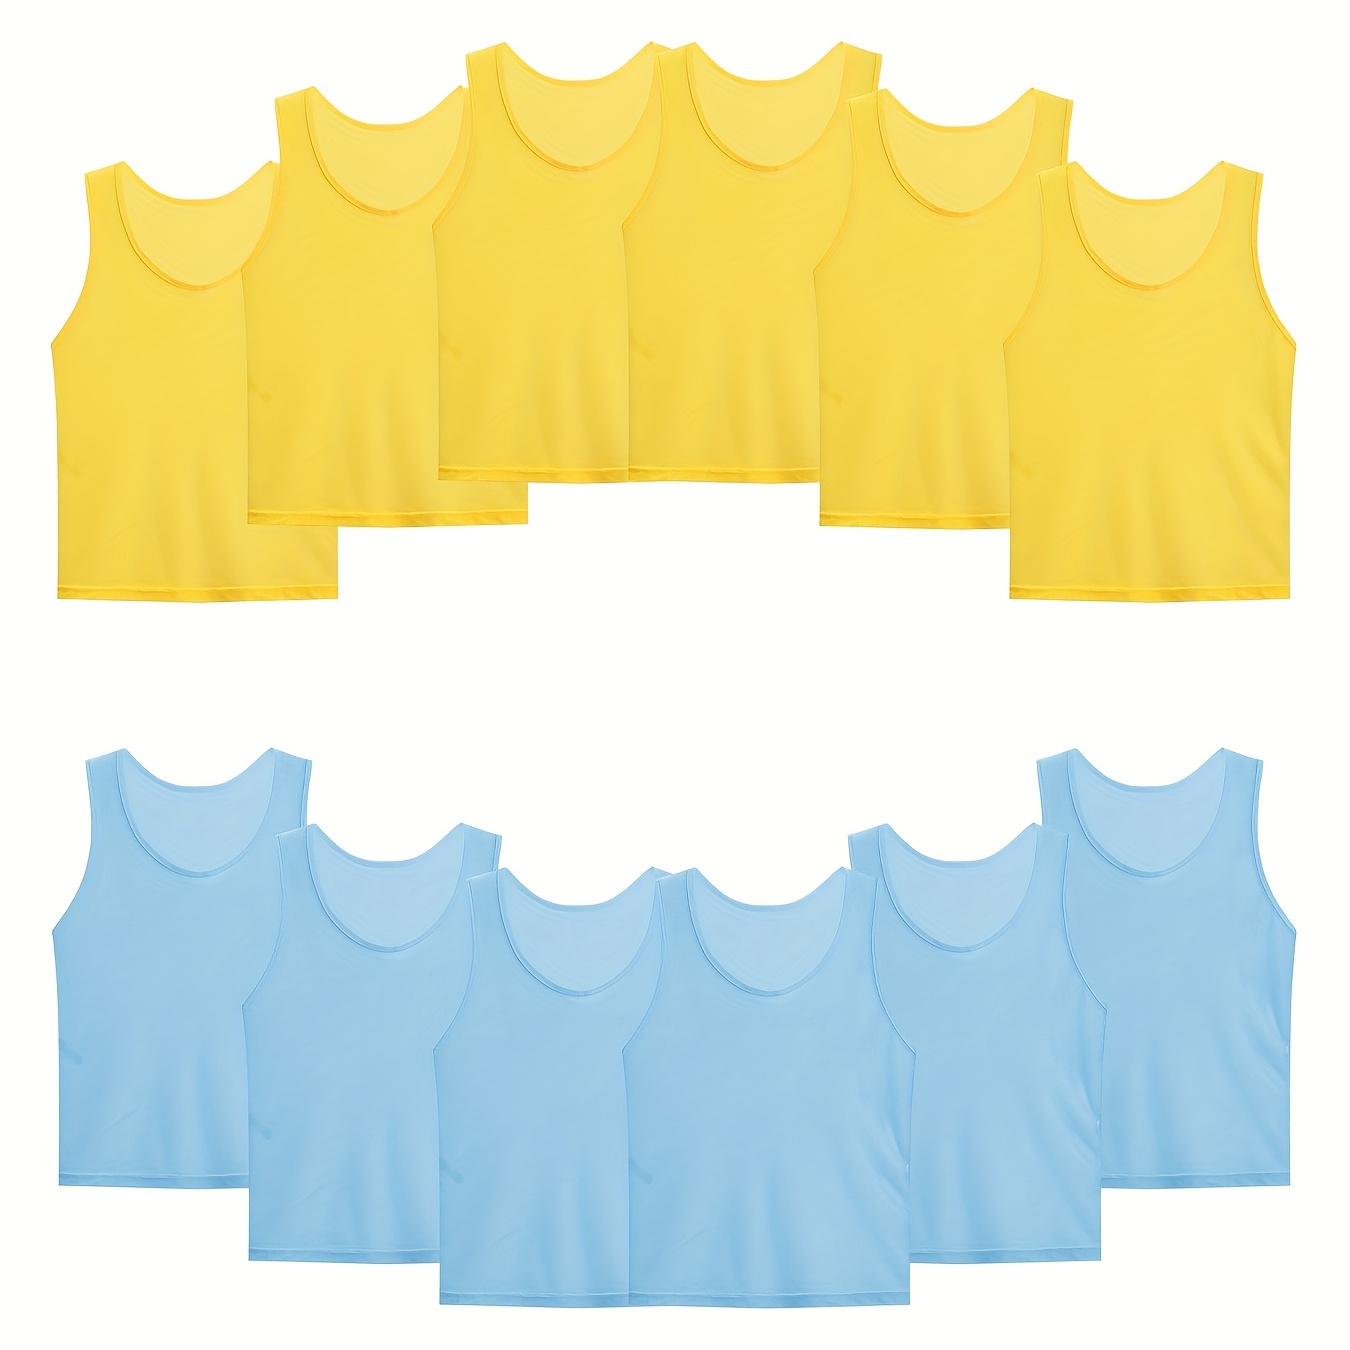 

12-pack Mesh Vests For Team Practice, Soccer/football/basketball Training Jerseys, Youth & Adult Sizes S-l, Breathable And Lightweight